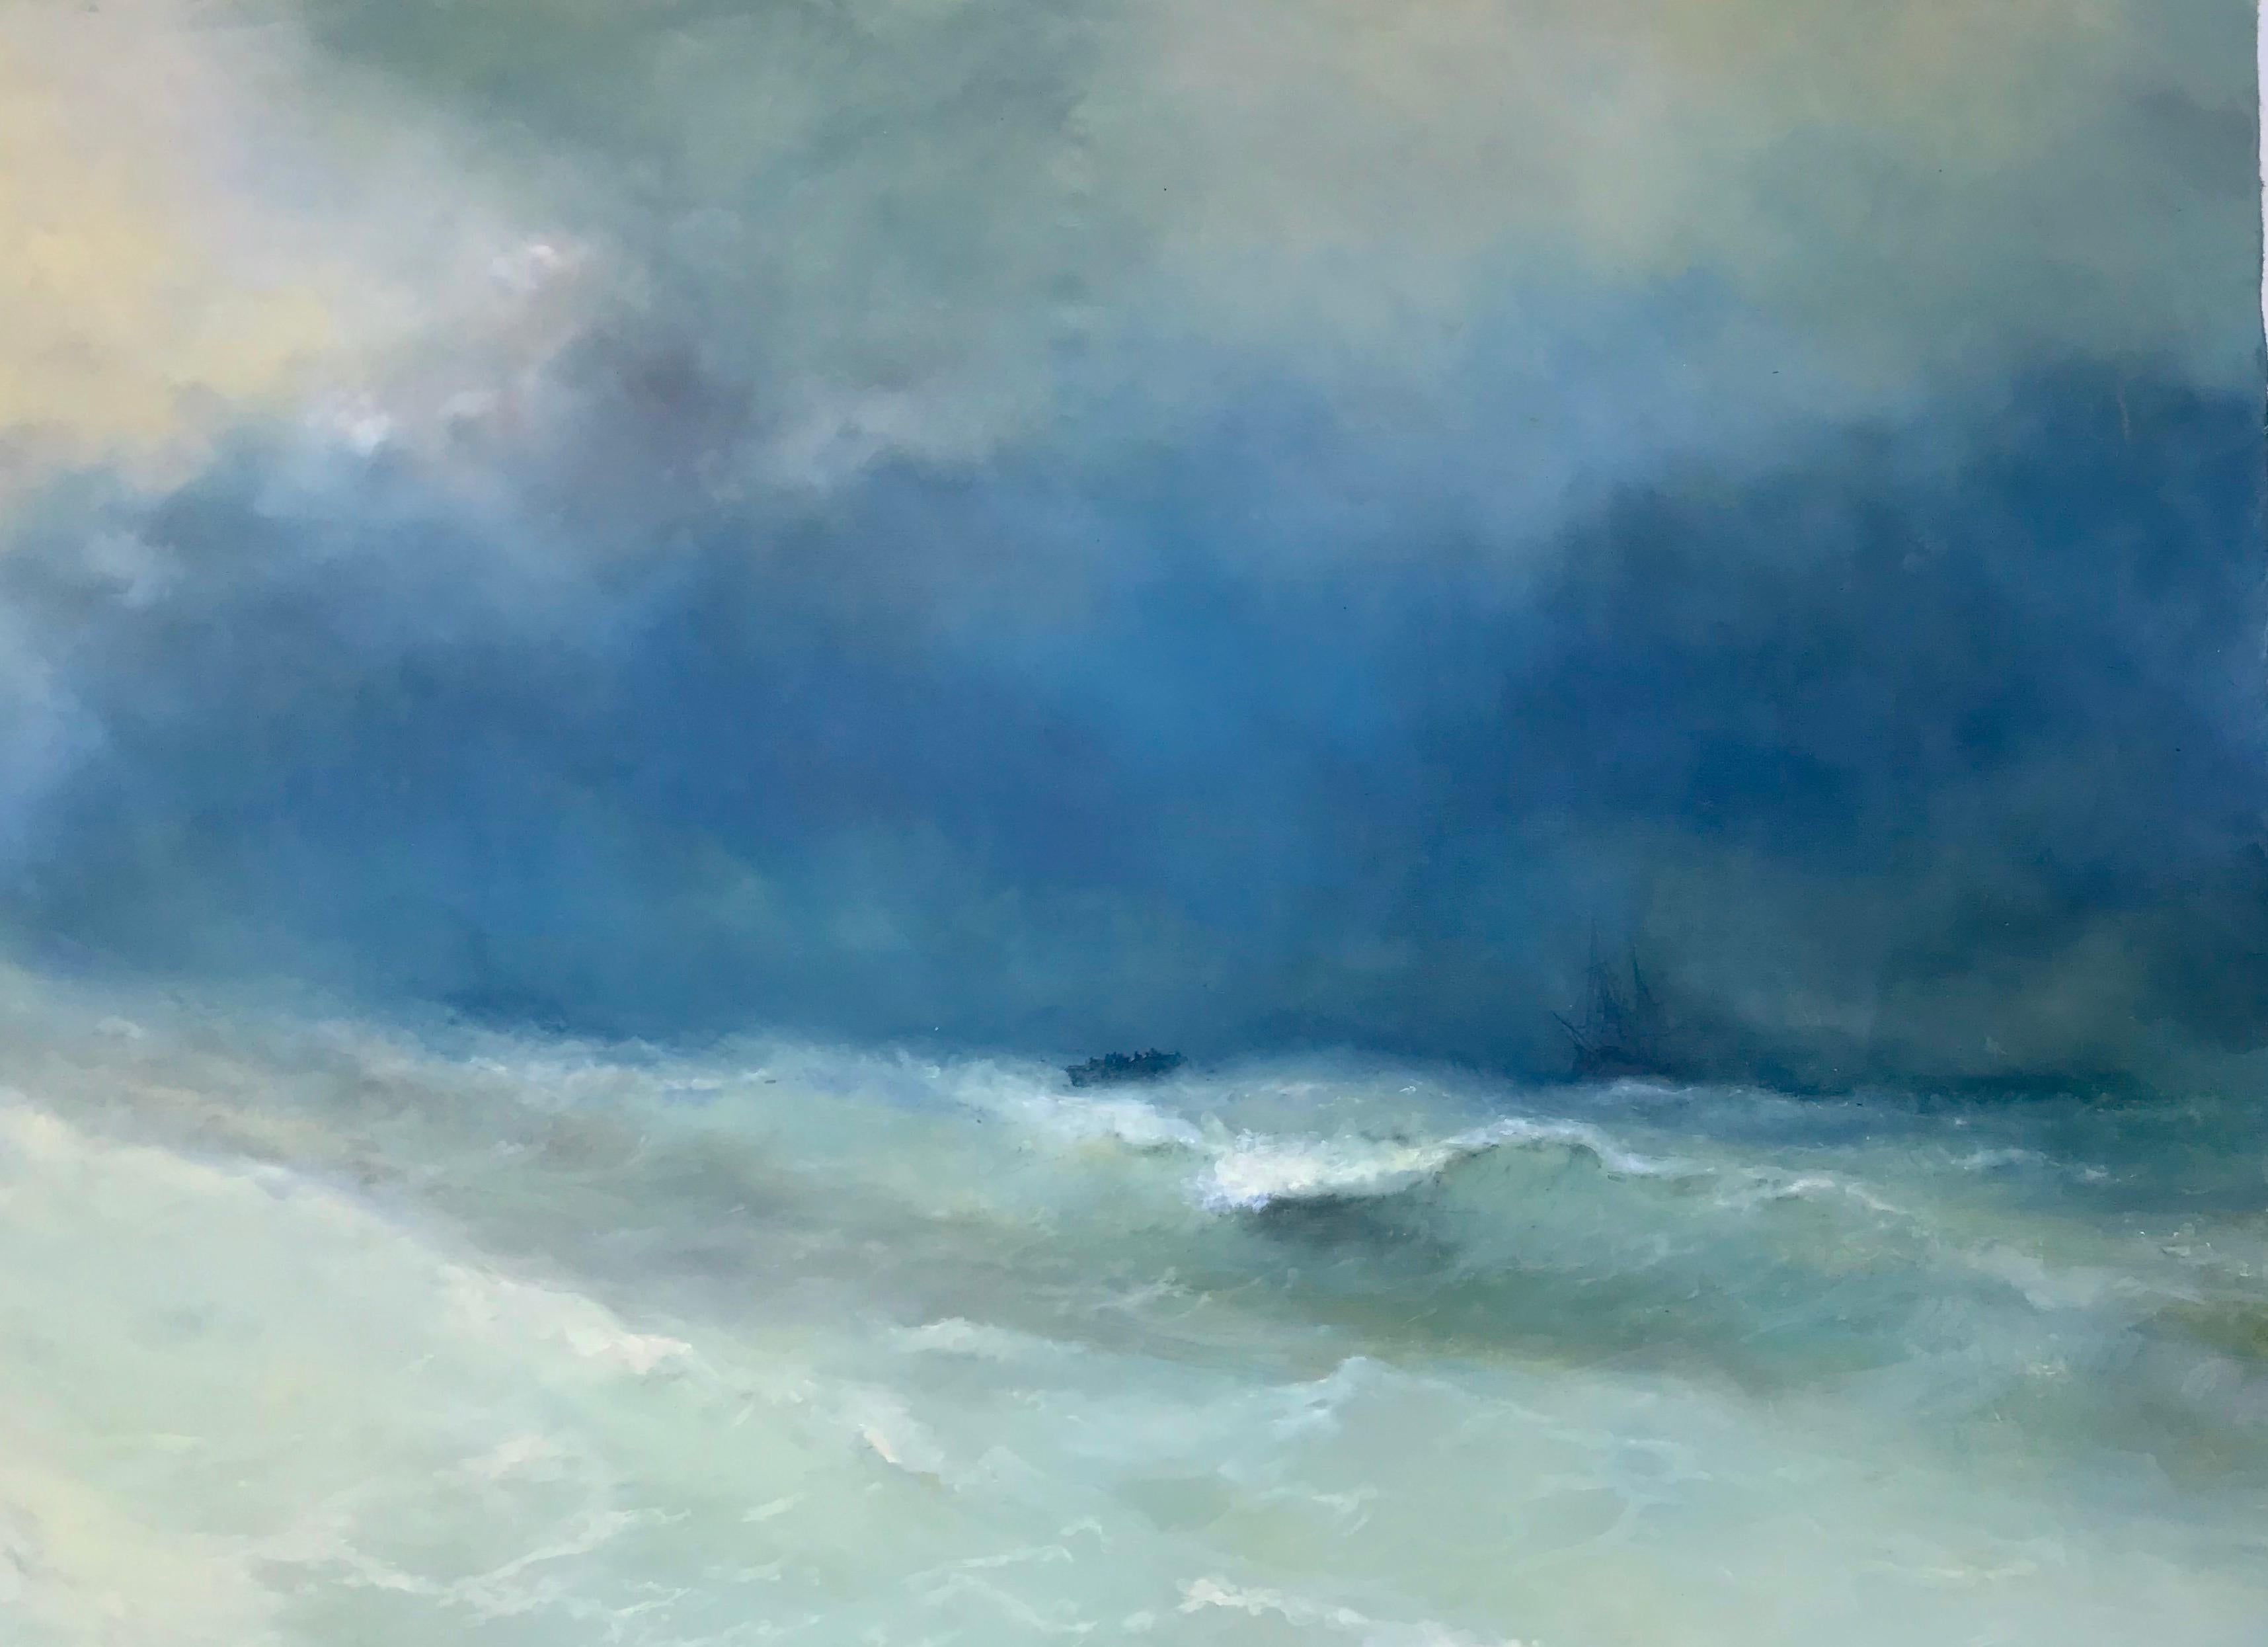 Play of Waves - Gray Landscape Painting by Karen Darbinyan